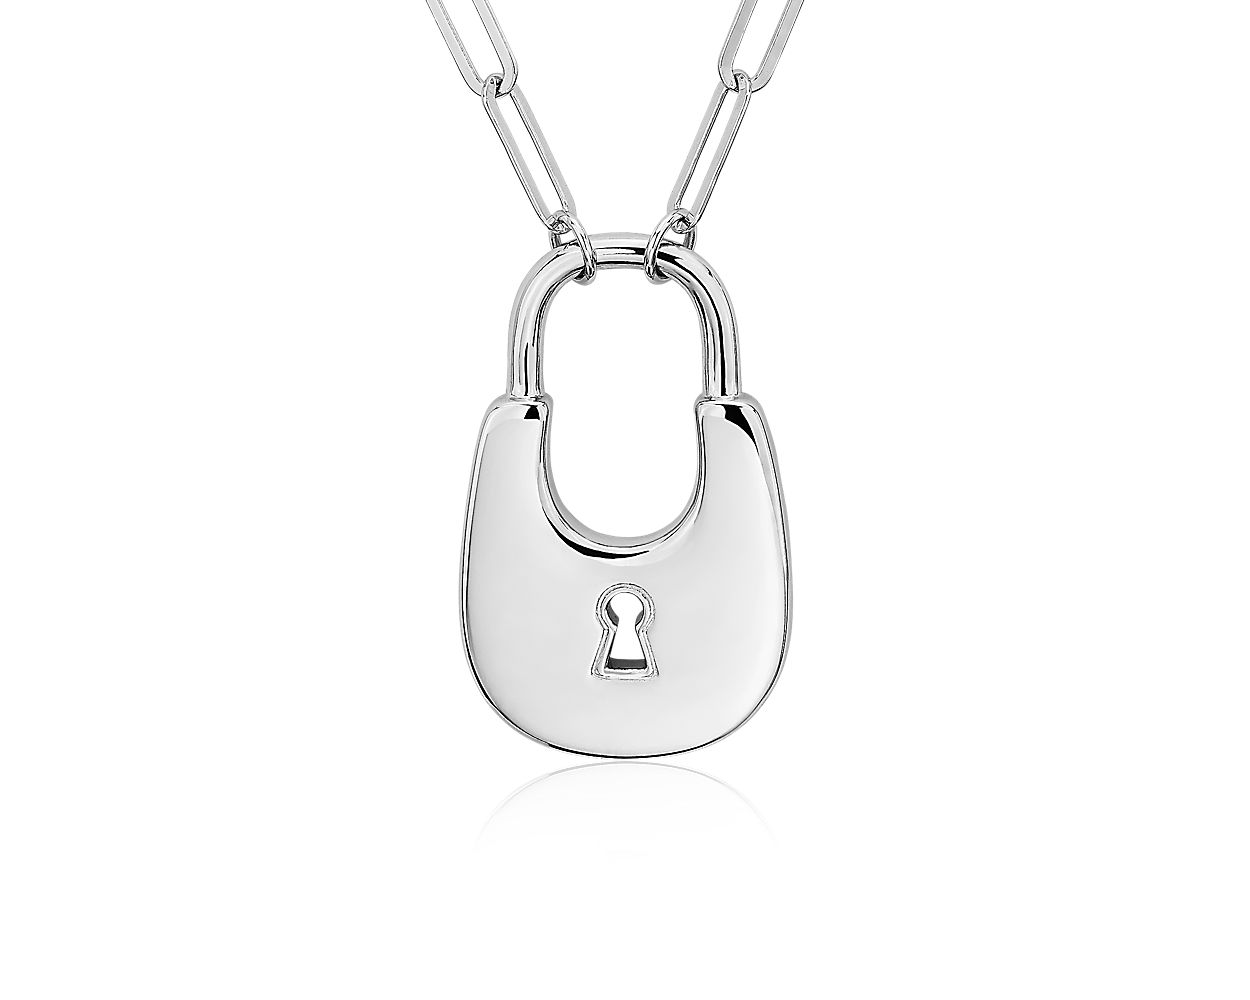 Tiffany & Co. Hammered Sterling Silver and 18k Pink Gold Horseshoe Padlock  Necklace - Yoogi's Closet